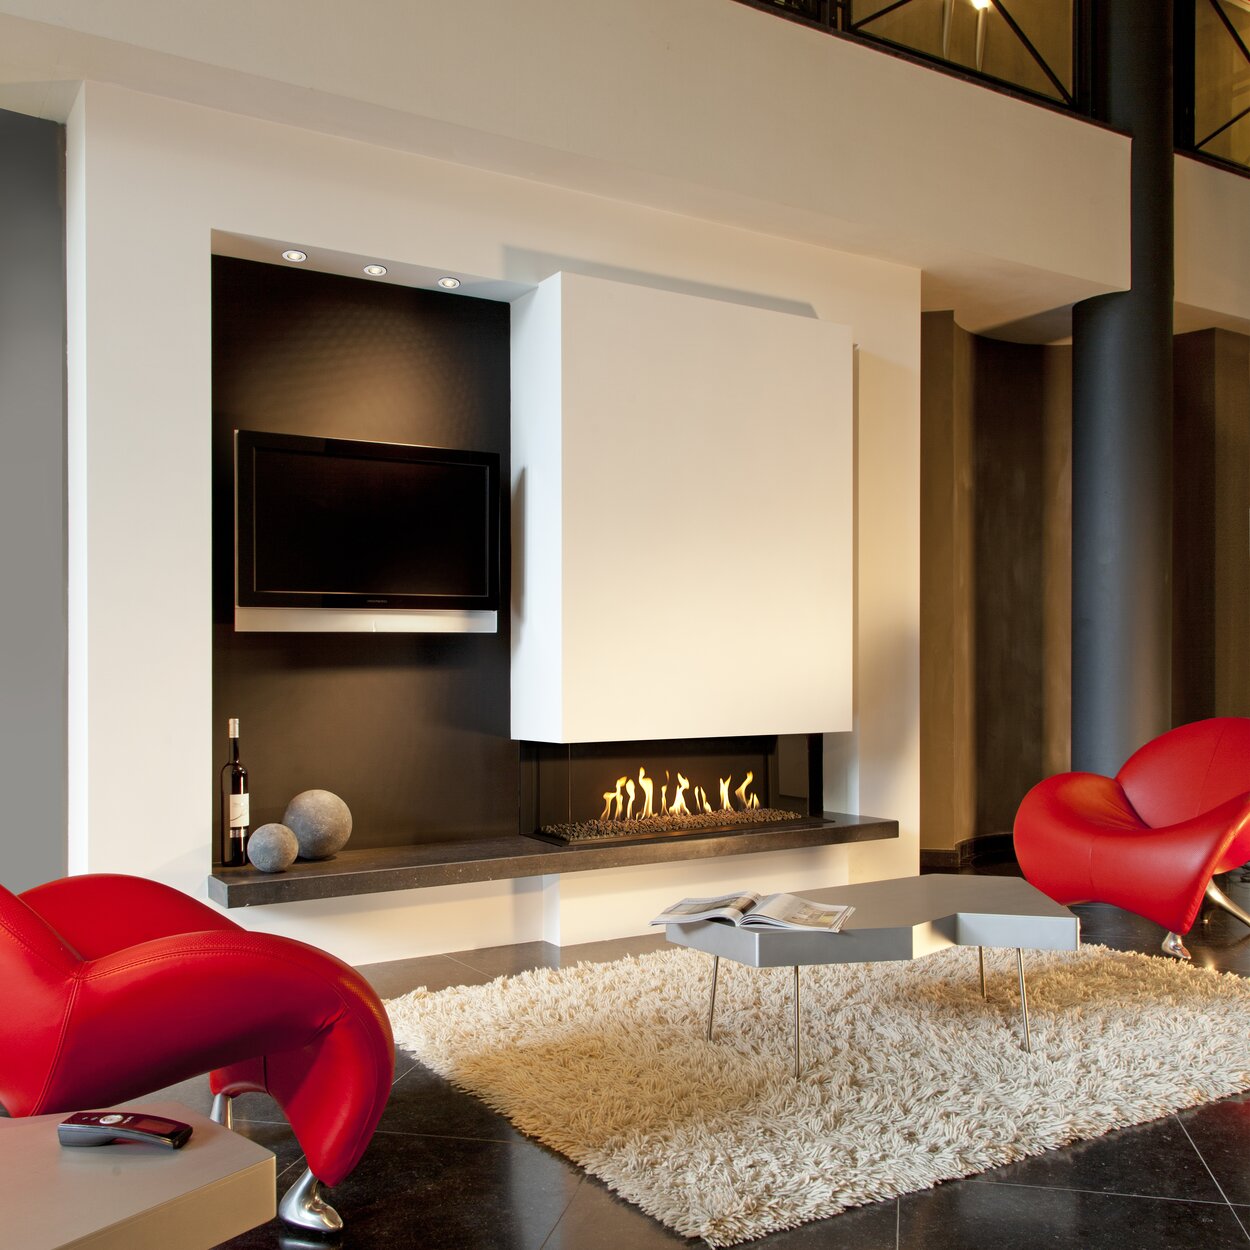 Gas fireplace G110/37S 3-sided with stones in the firebox in large living room with red armchairs 